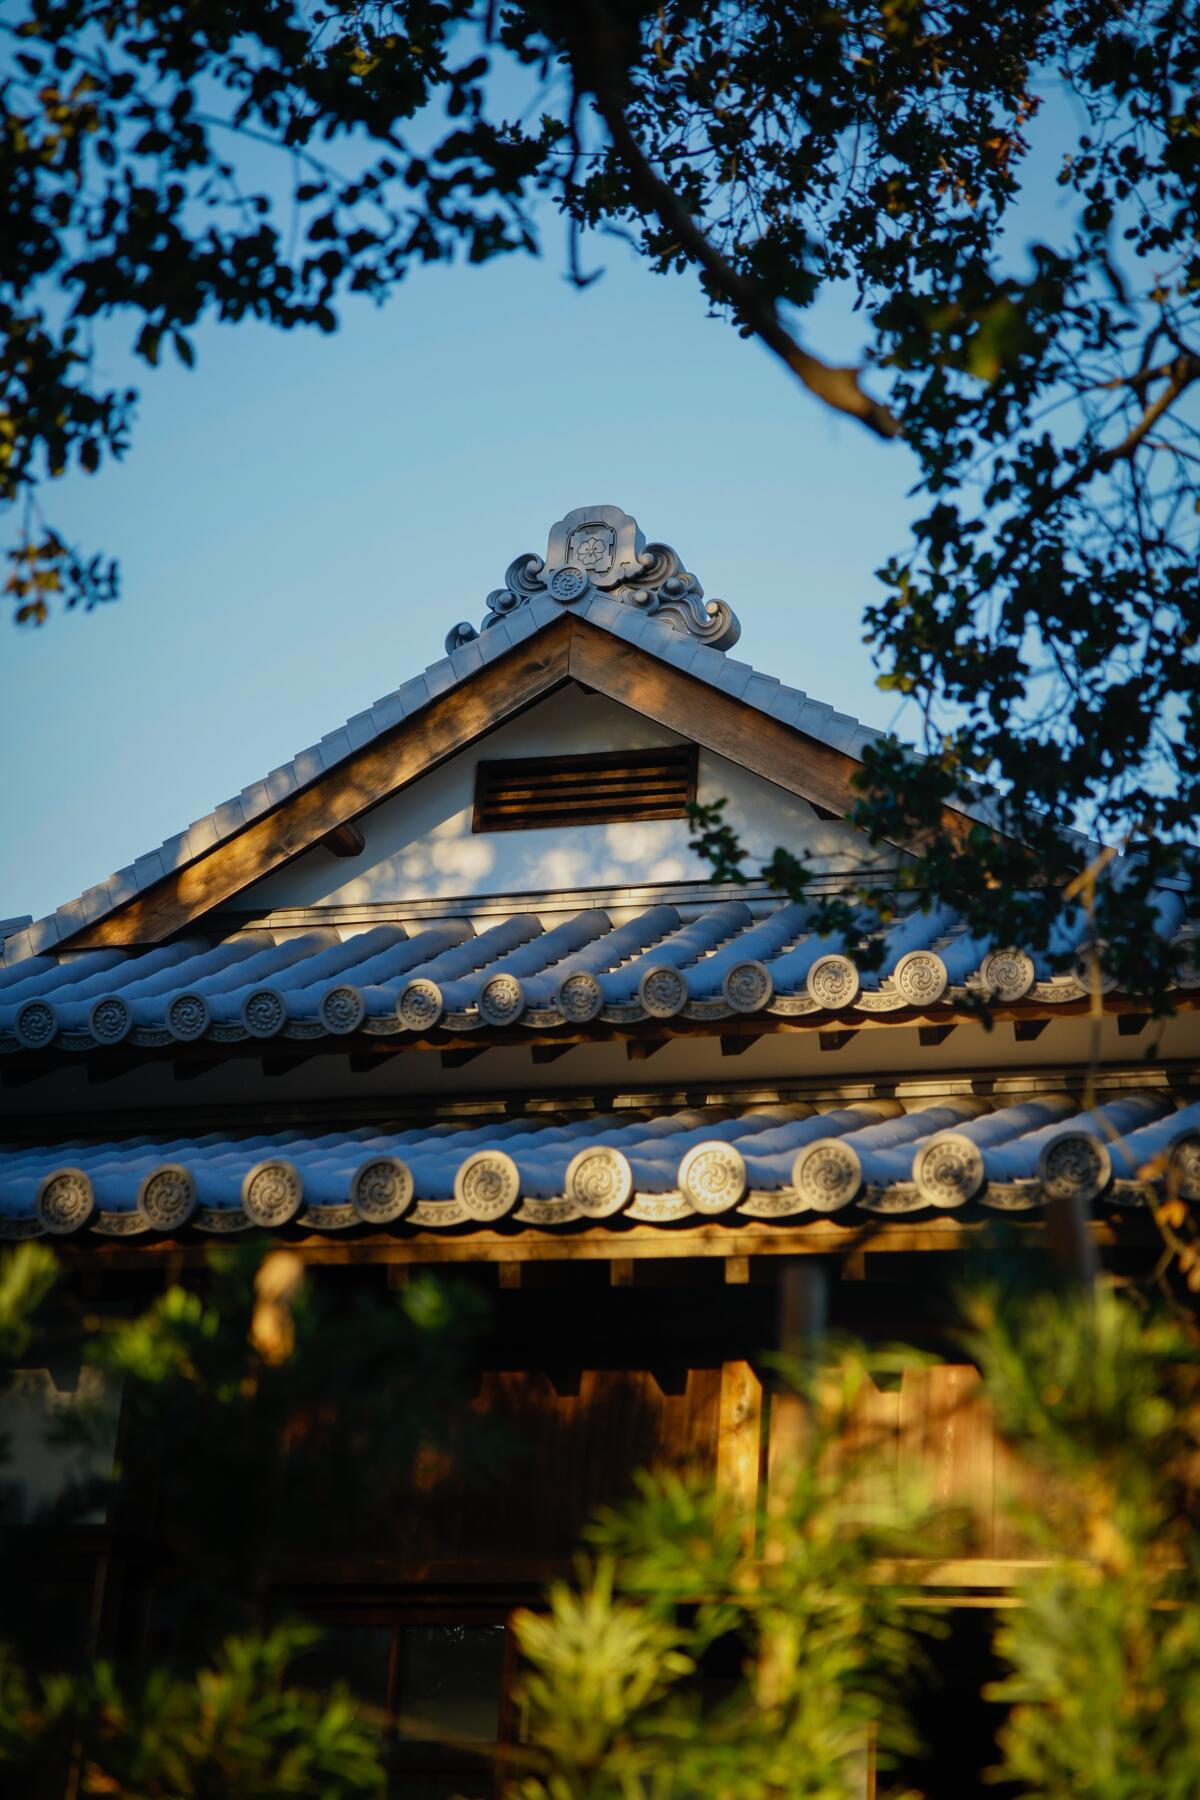 A detail view shows the decorative roof tiles of a three-century old Japanese shoya house